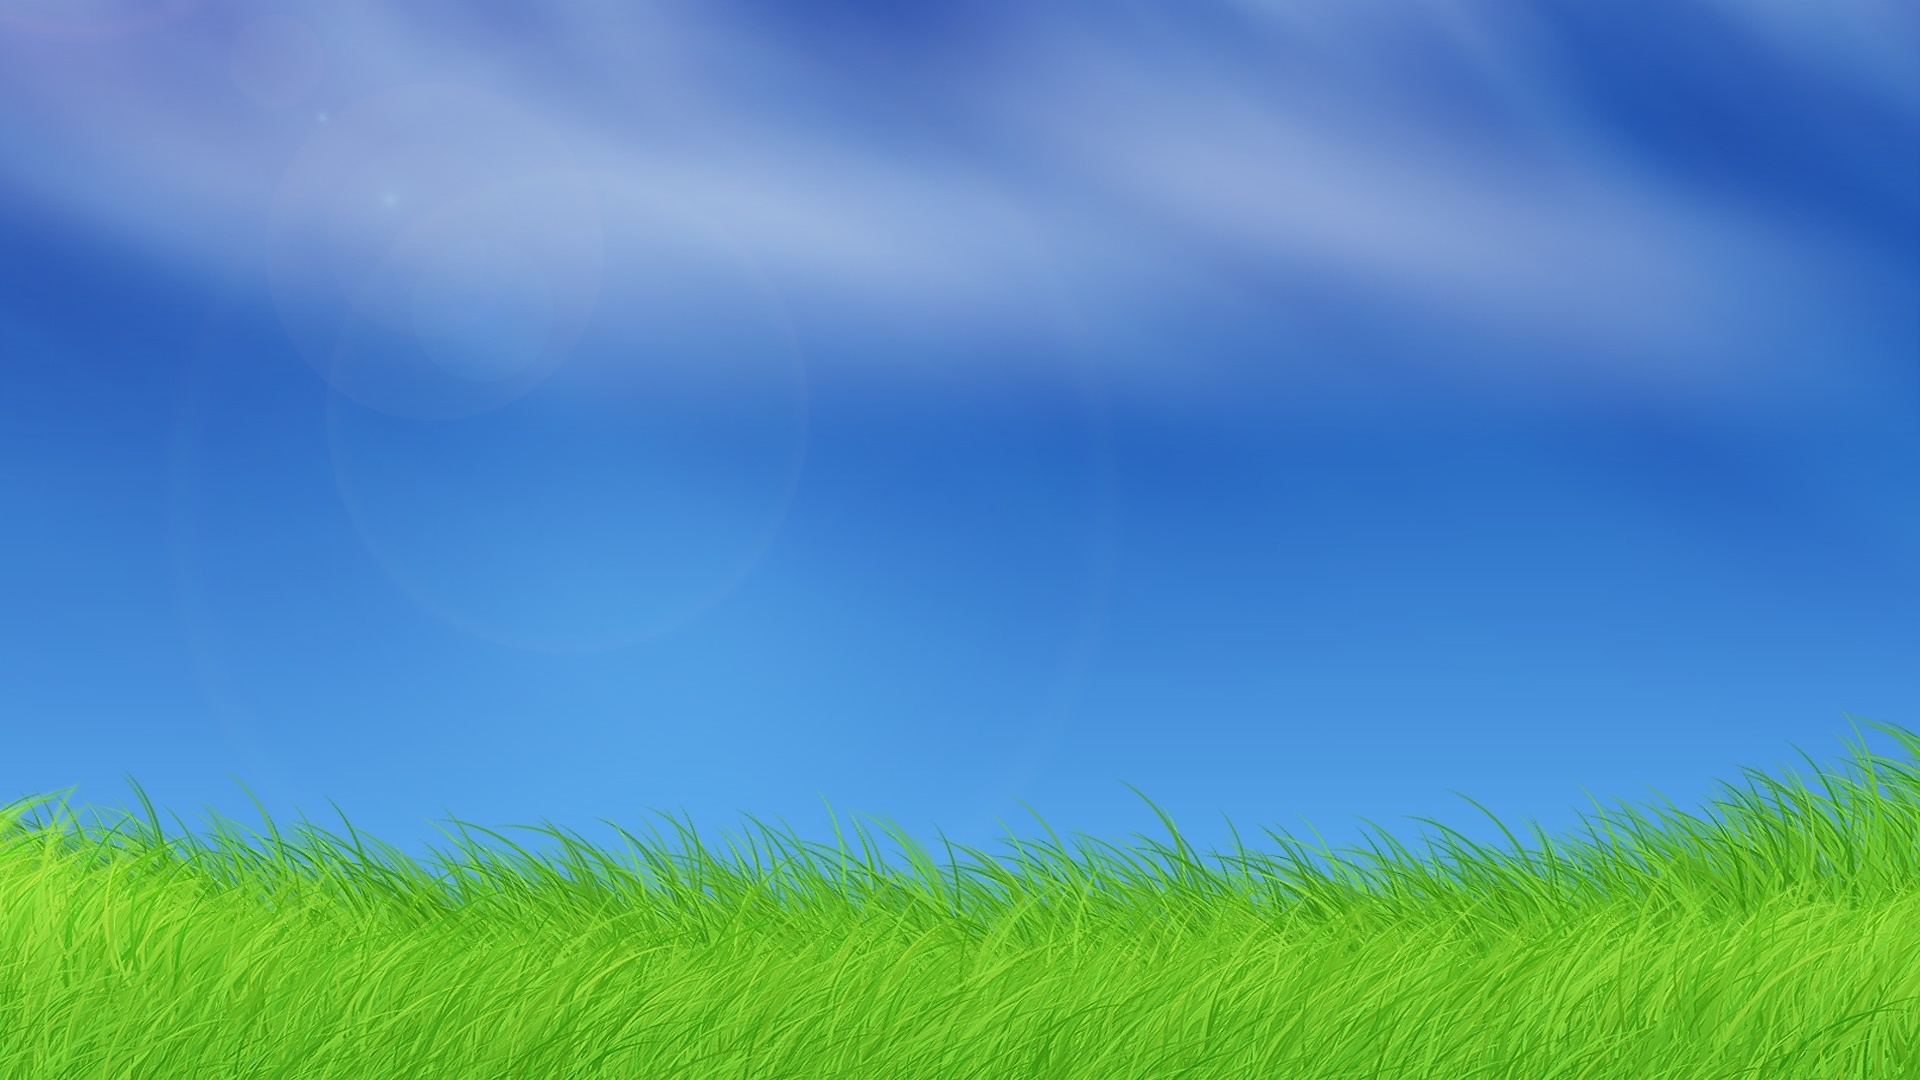 25 Sky and Grass Wallpapers